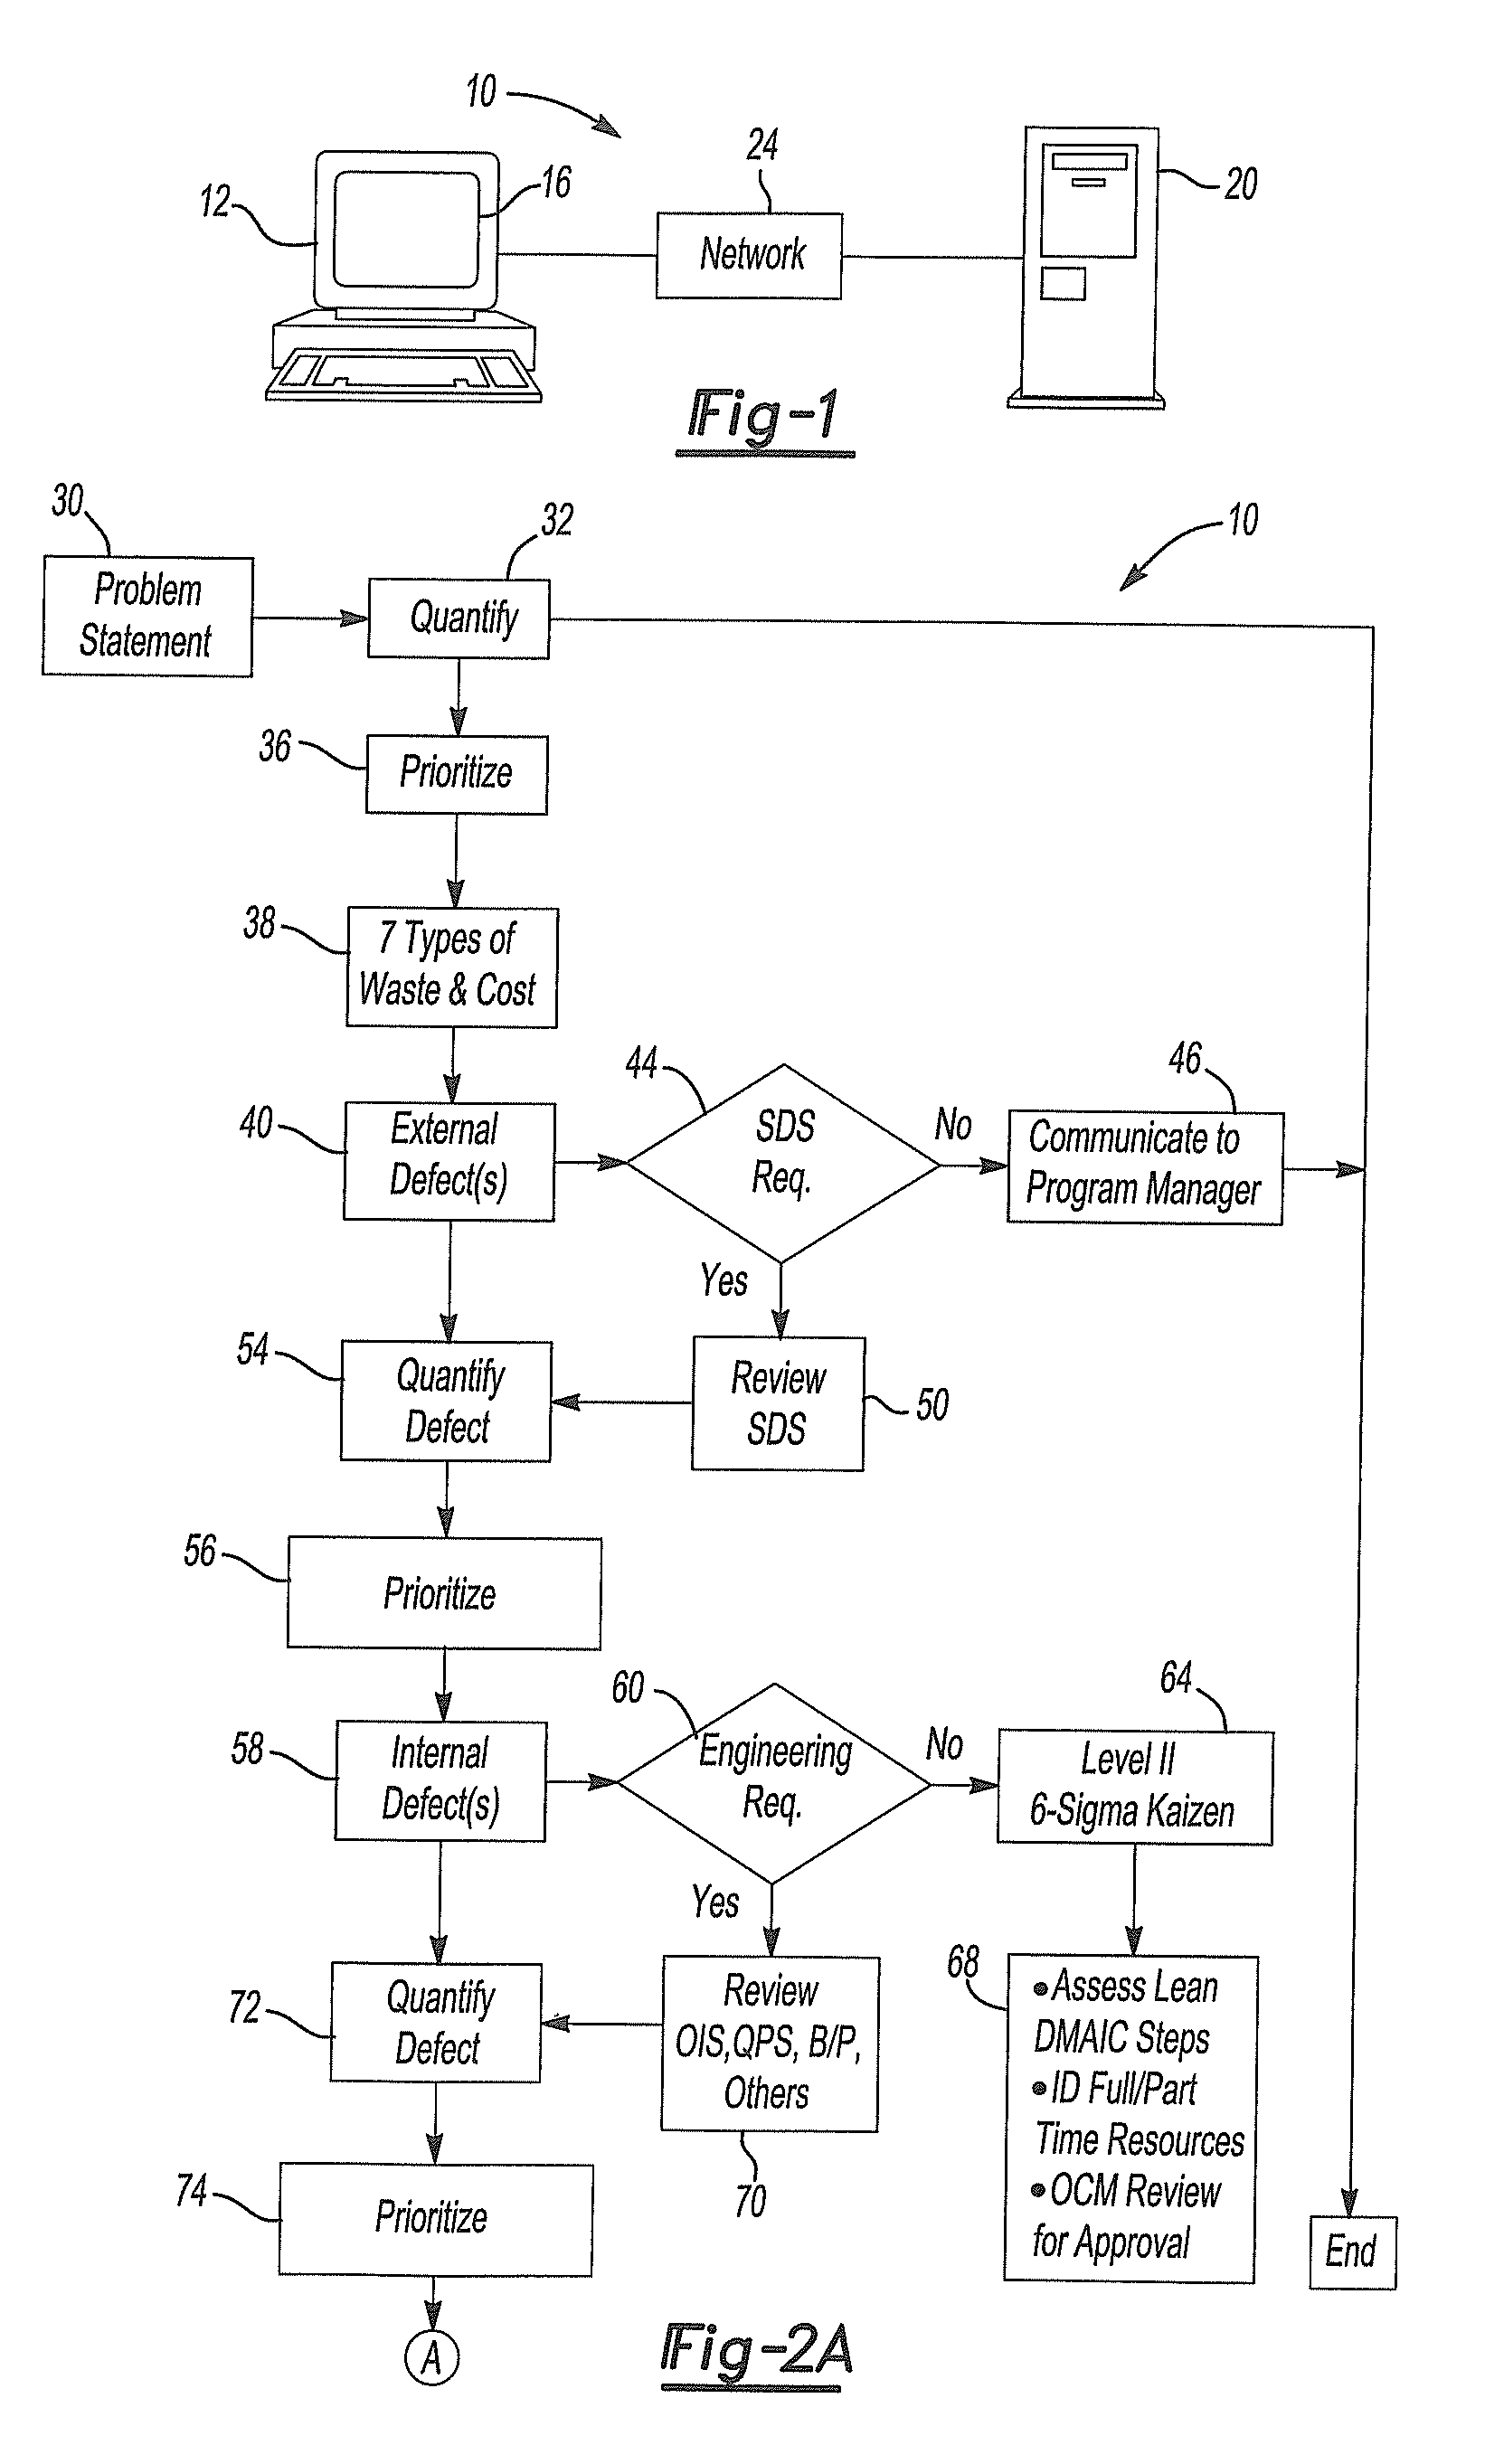 Computer-implemented method for analyzing a problem statement based on an integration of Six Sigma, Lean Manufacturing, and Kaizen analysis techniques